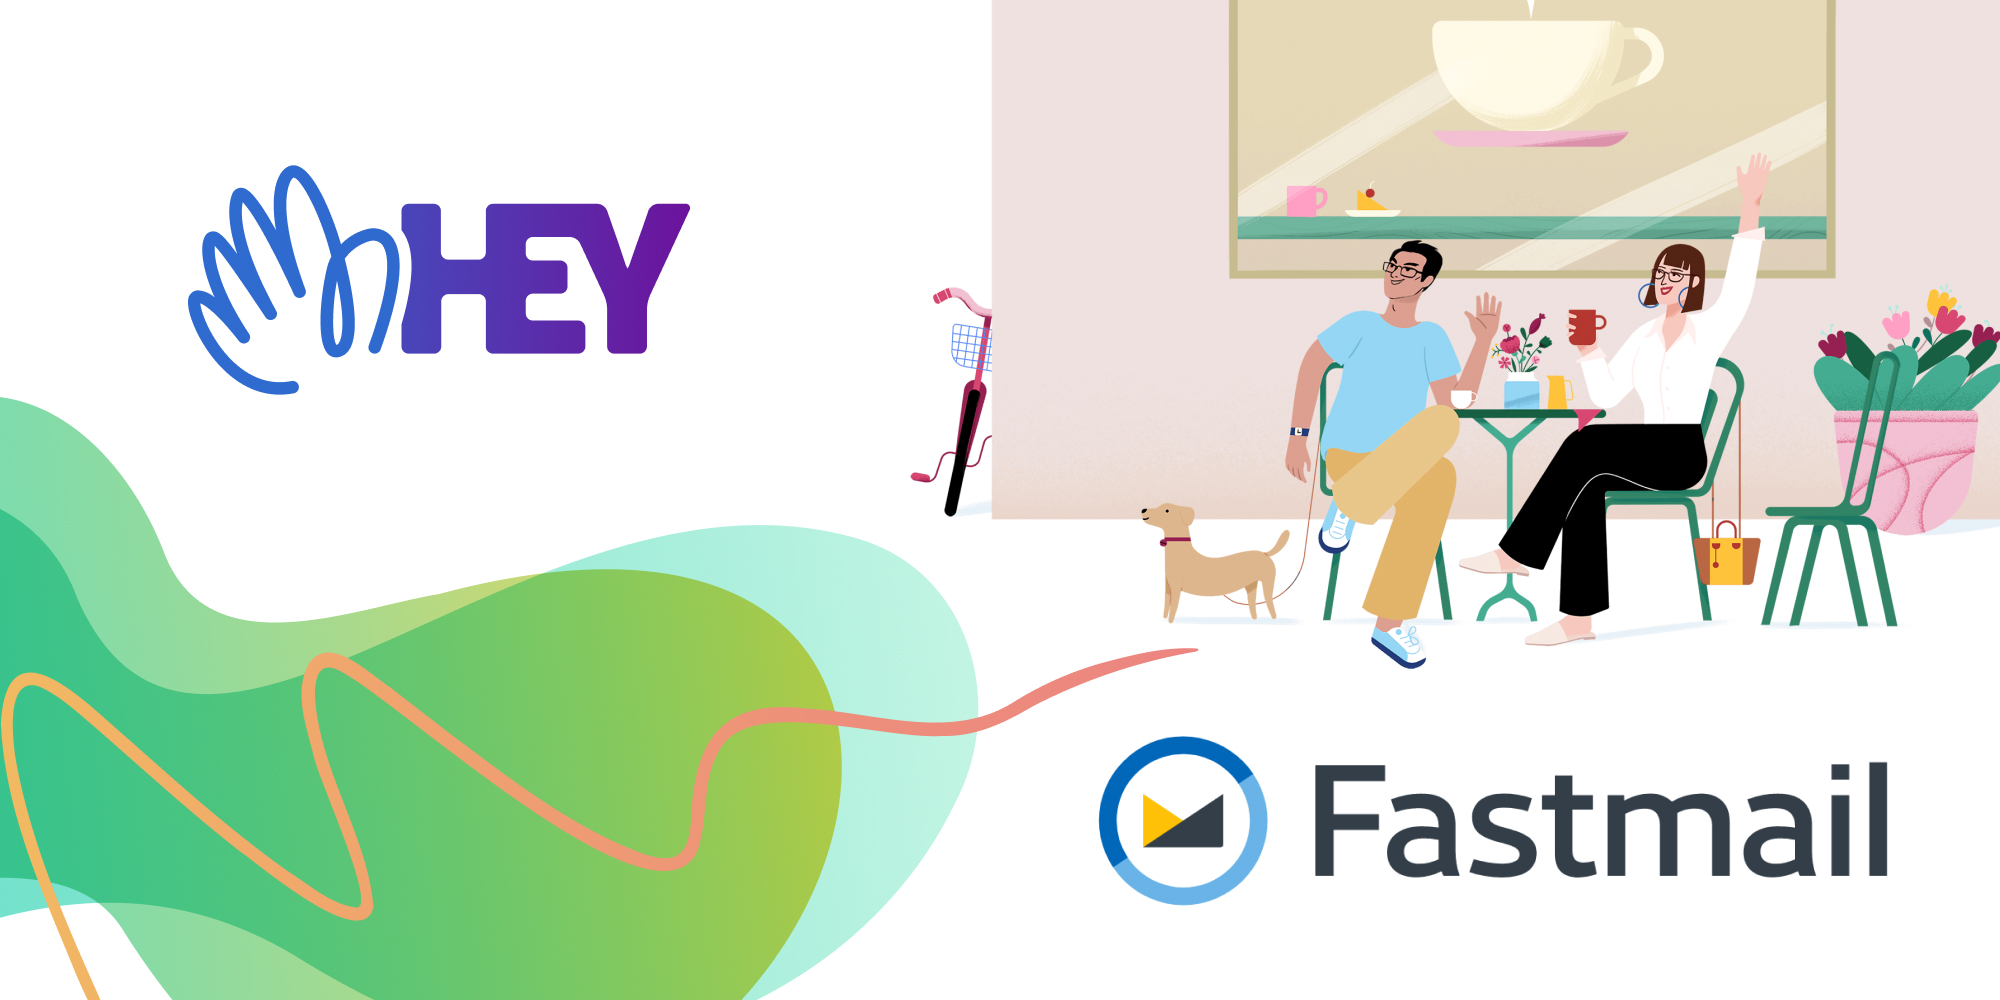 Cover Image for Moving from HEY to Fastmail